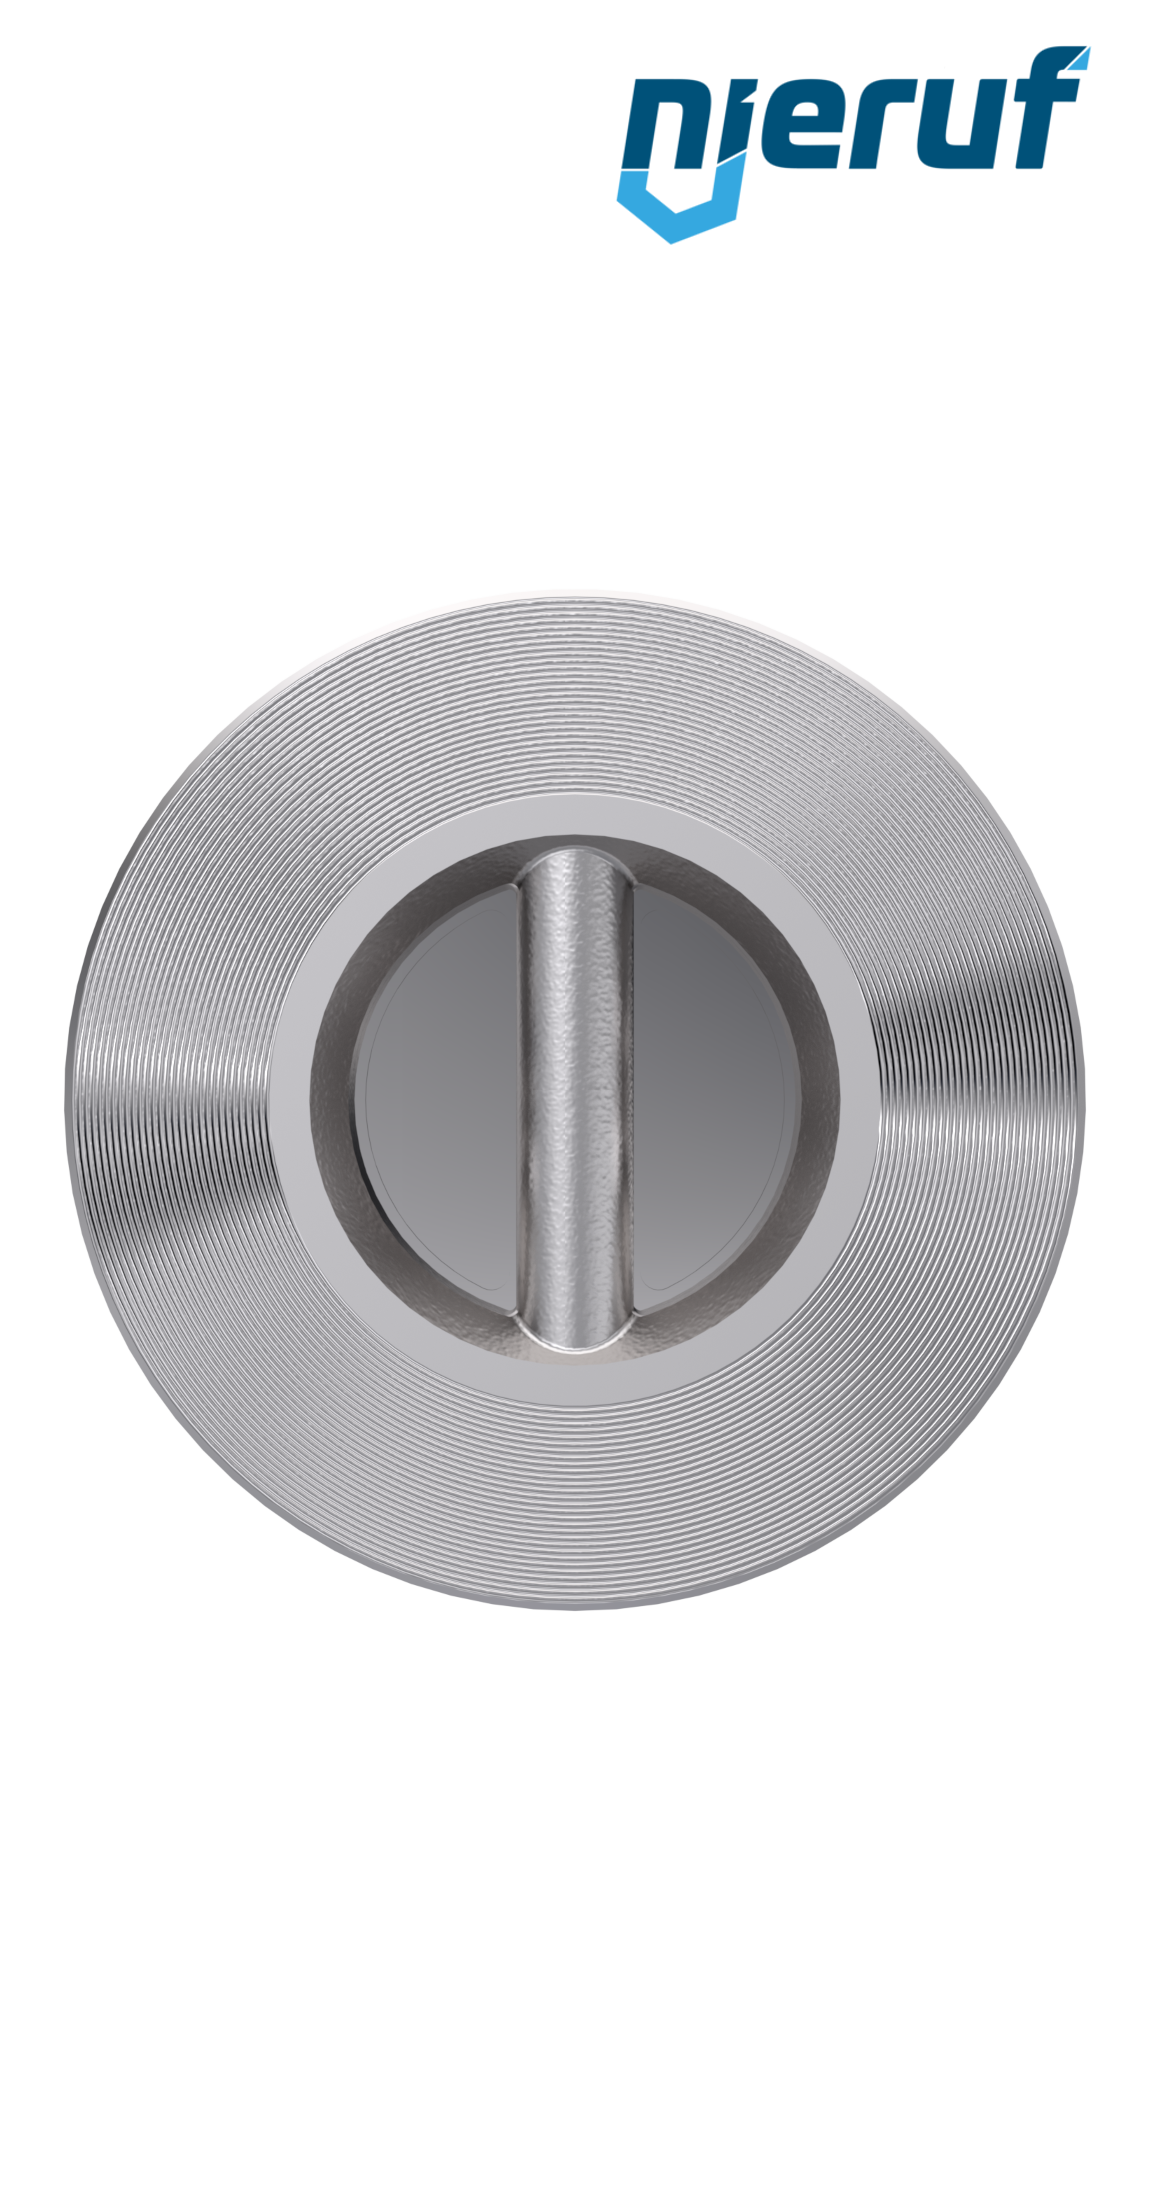 dual plate check valve DN400 DR03 stainless steel 1.4408 metal